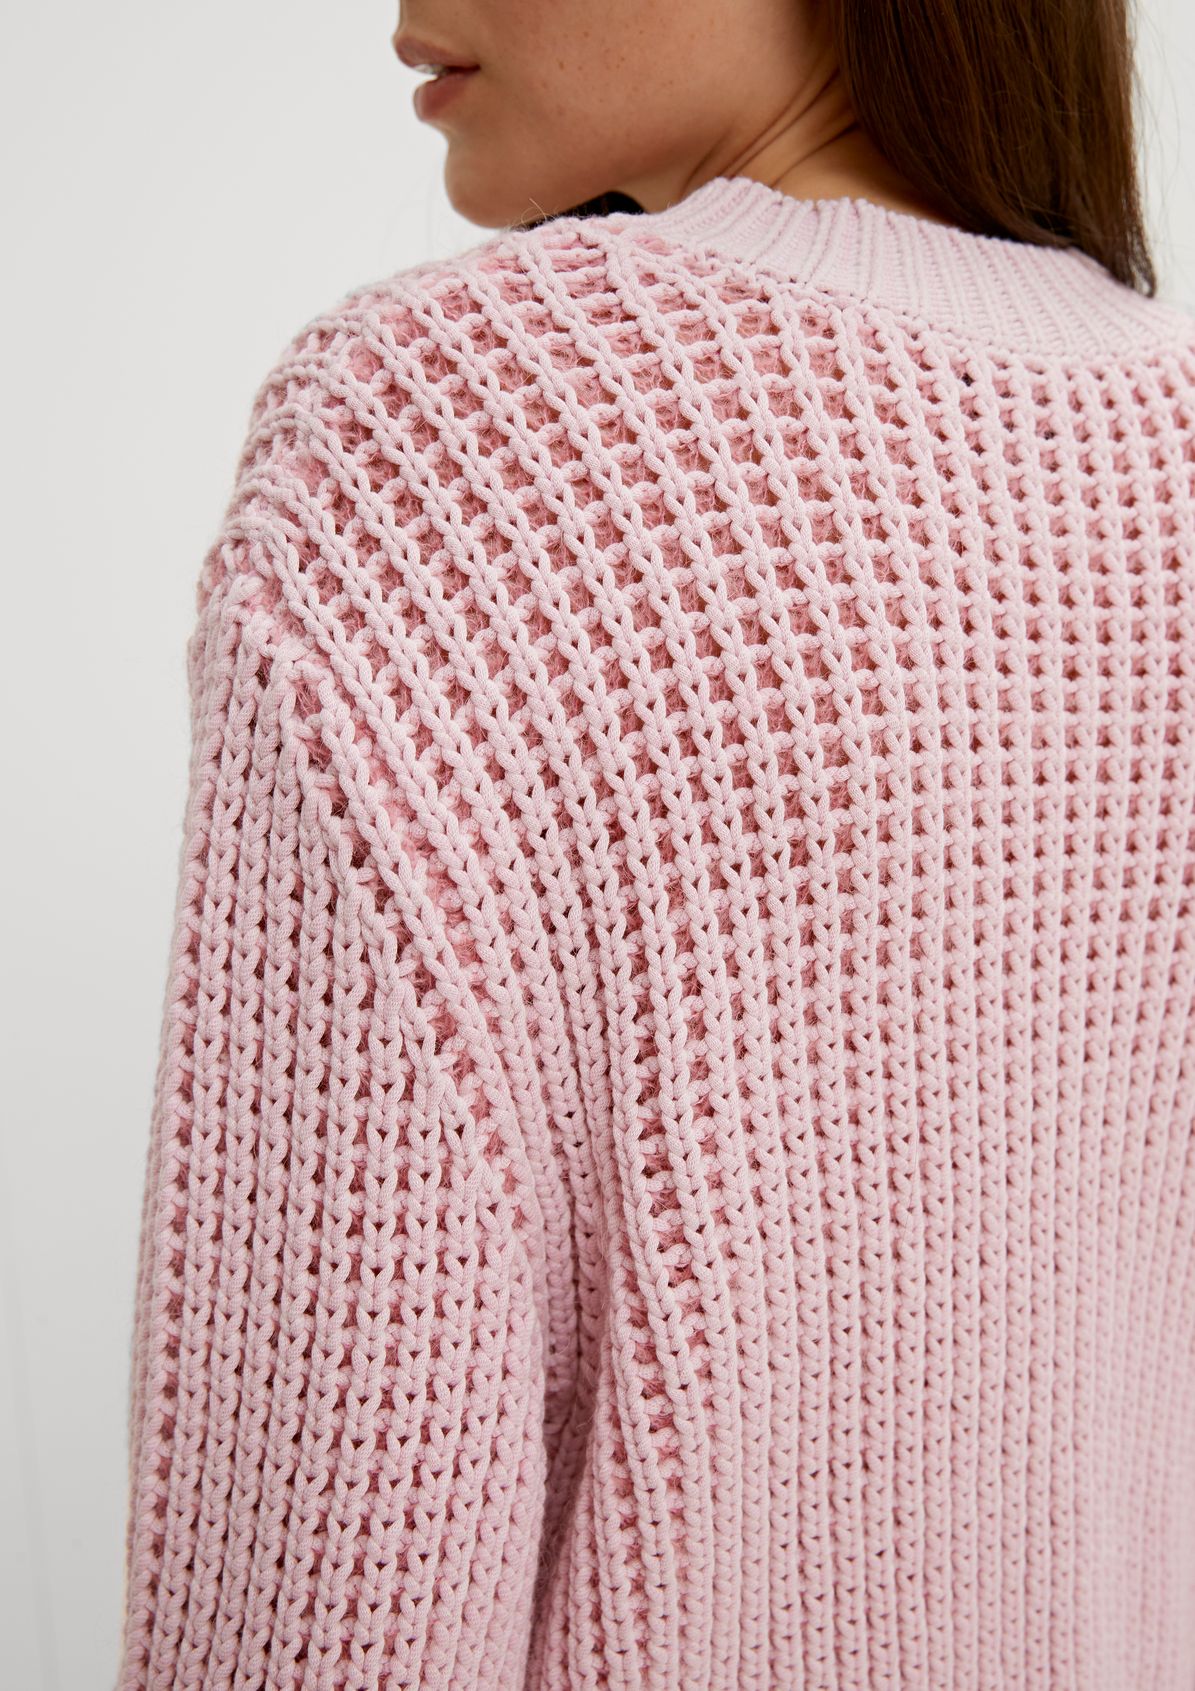 Knitted jumper with an openwork pattern from comma